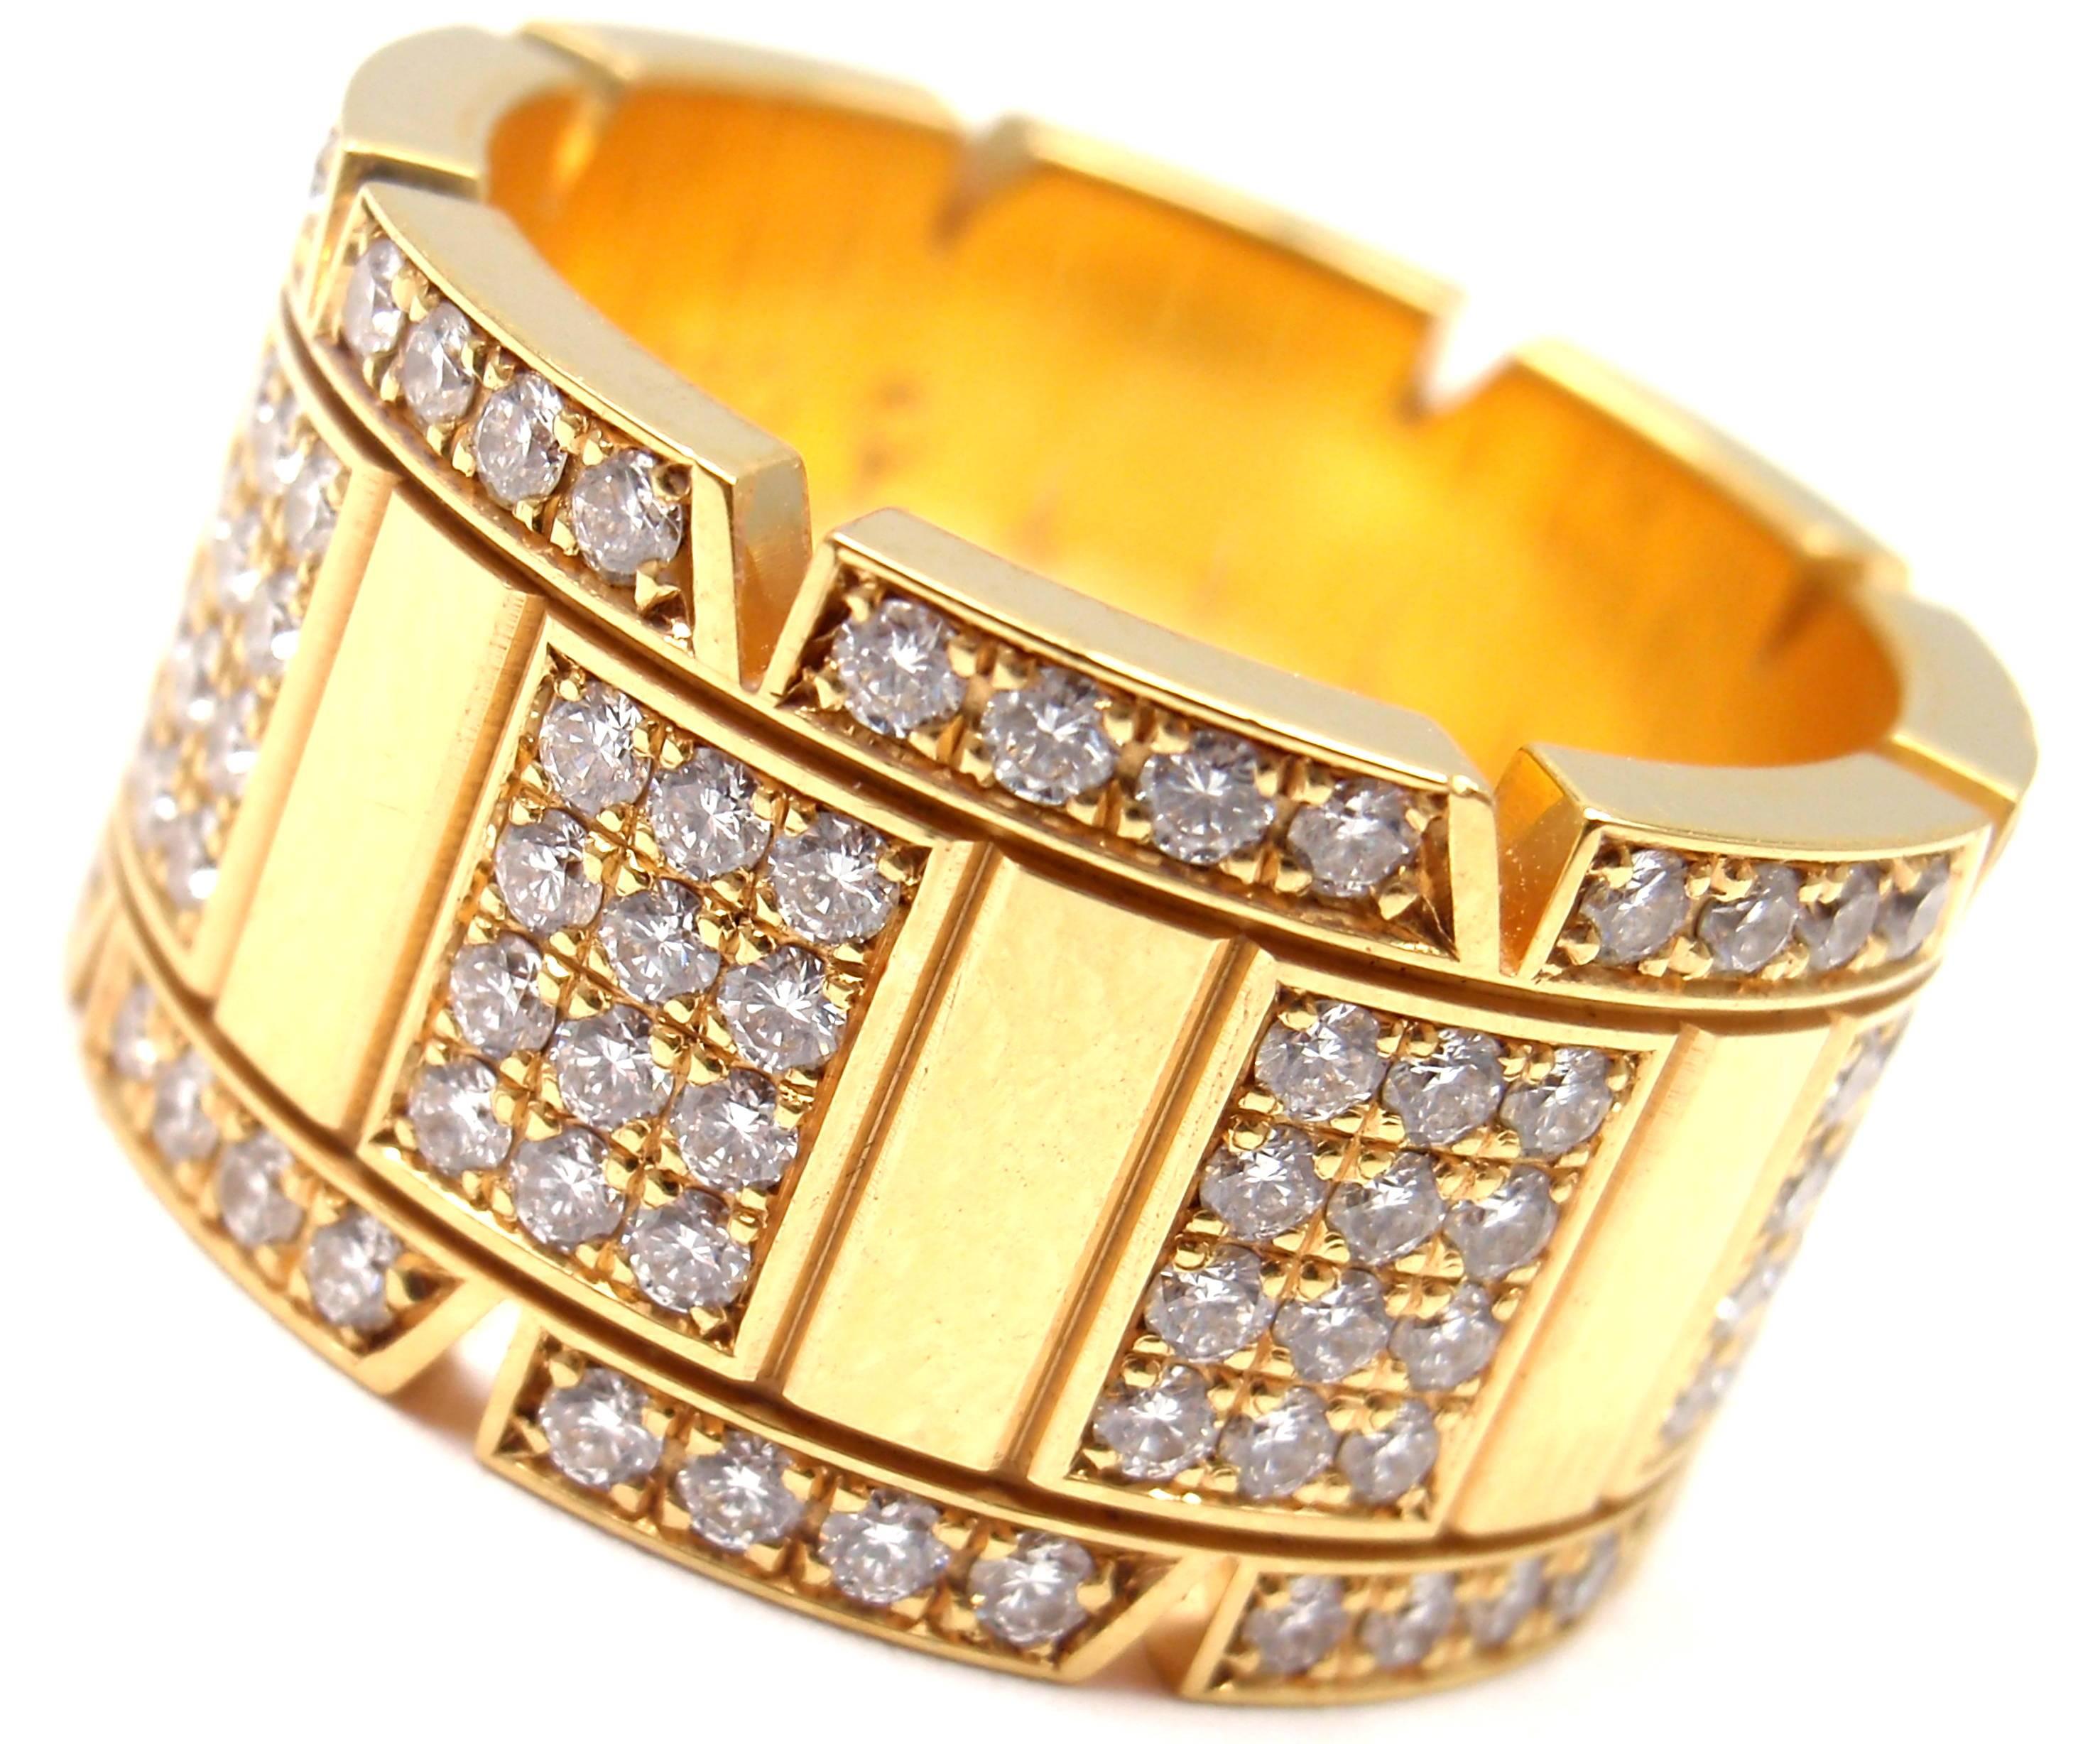 18k Yellow Gold Diamond Large Model Tank Francaise Ring by Cartier. 
With 160 round brilliant cut diamonds total weight approx 2.5ct. 
Diamonds VVS1 clarity, F color.
This absolutely gorgeous ring comes with original Cartier box and a Cartier